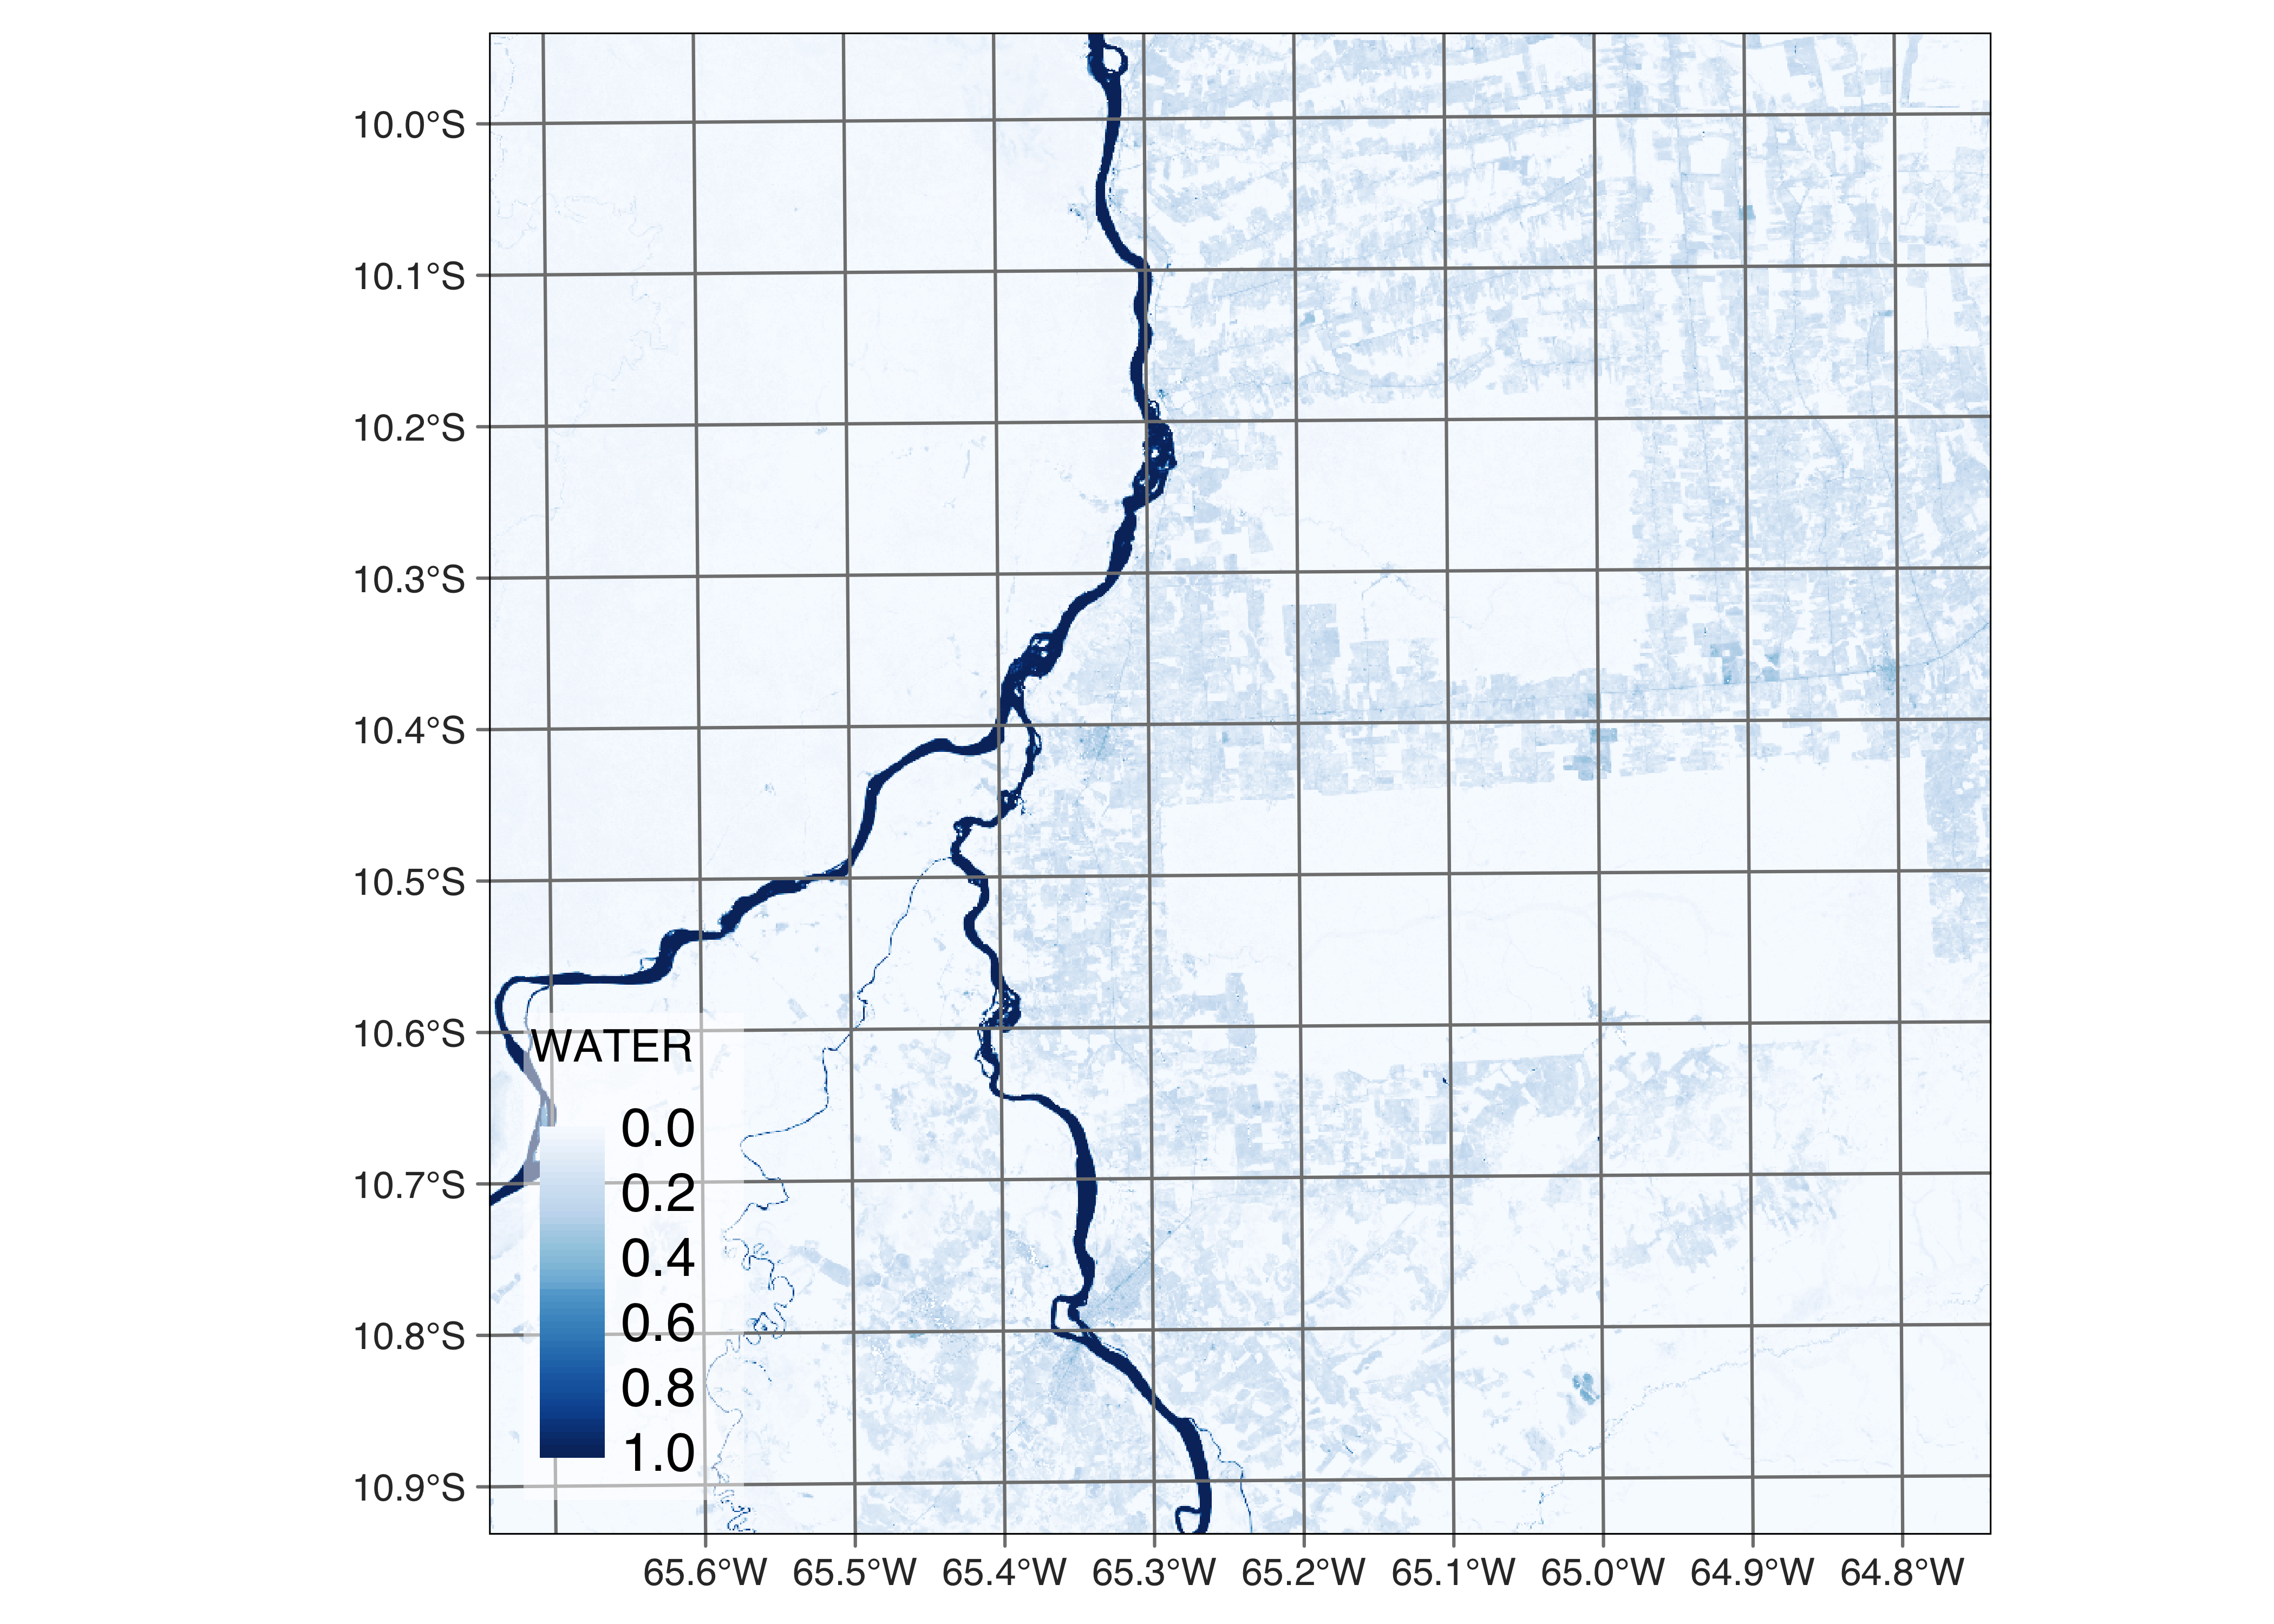 Percentage of water per pixel estimated by mixture model (Source: Authors).